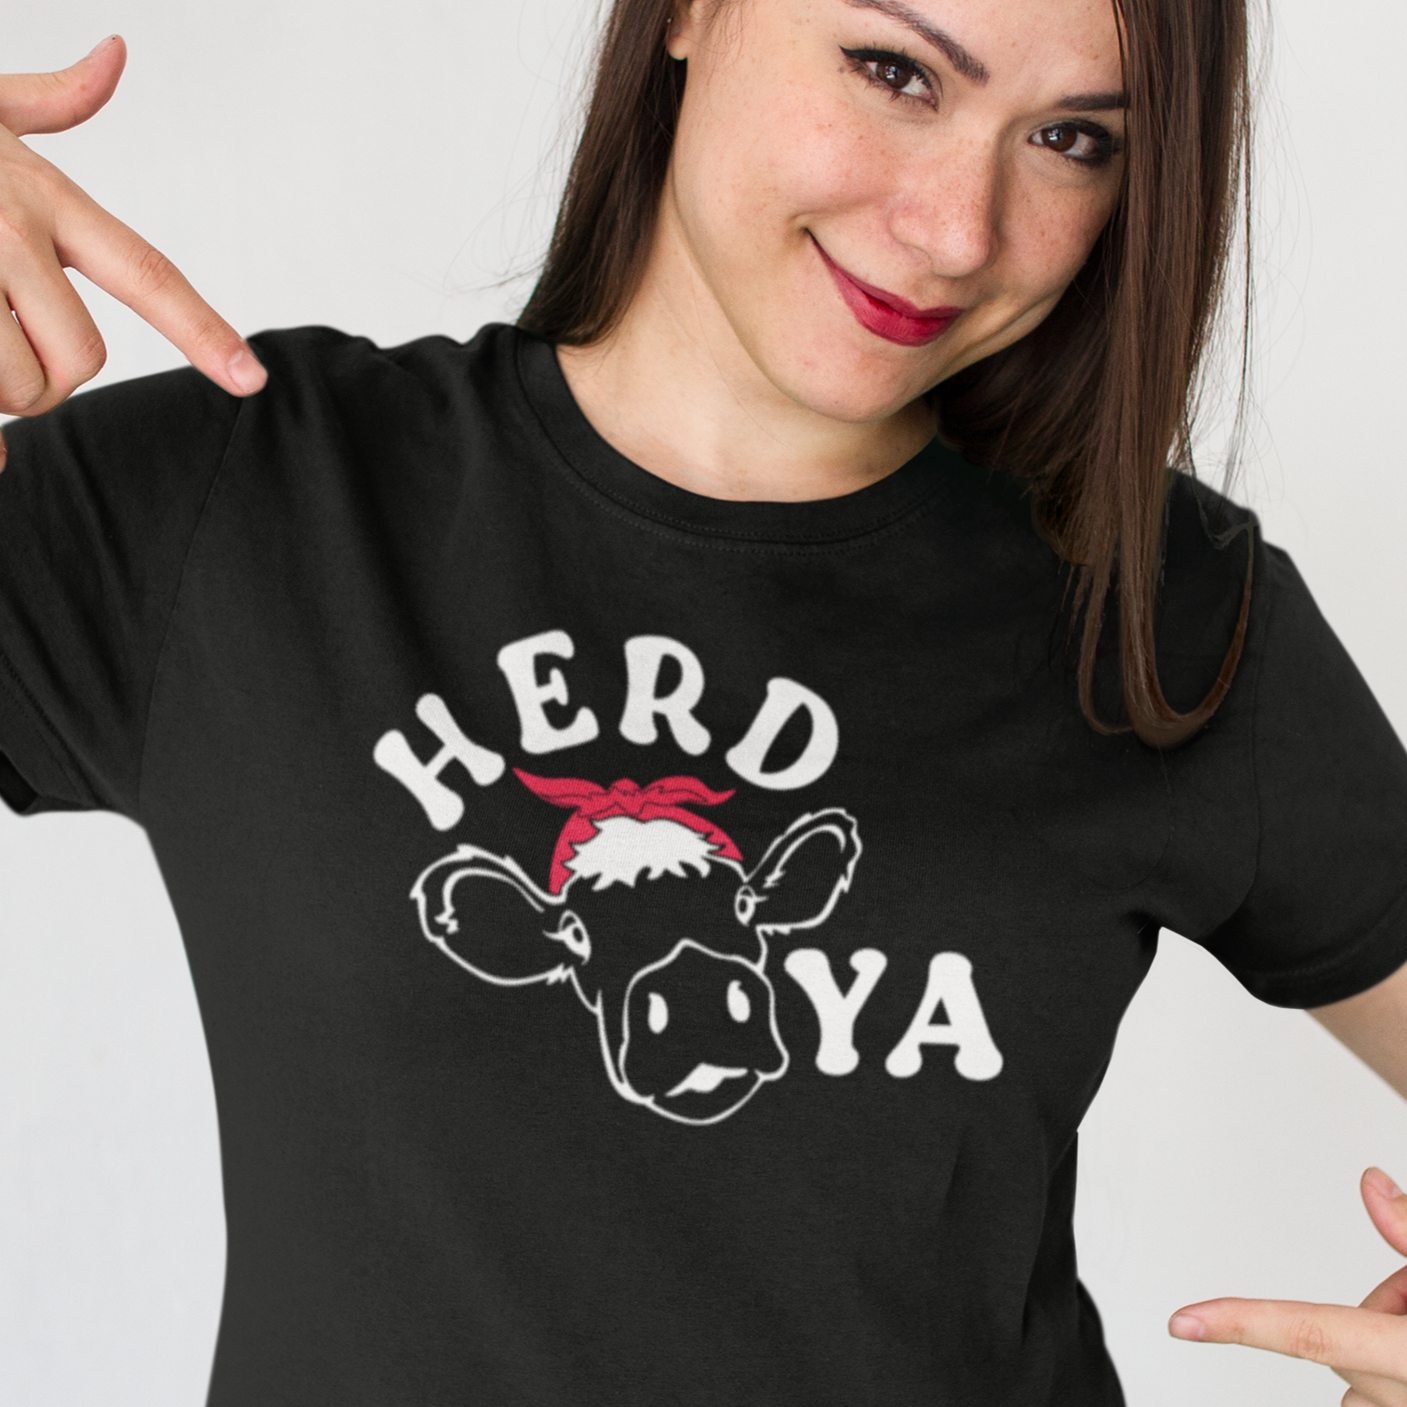 herd-ya-black-t-shirt-cowgirl-smiling-customer-showing-her-new-tee-mockup-against-a-white-background